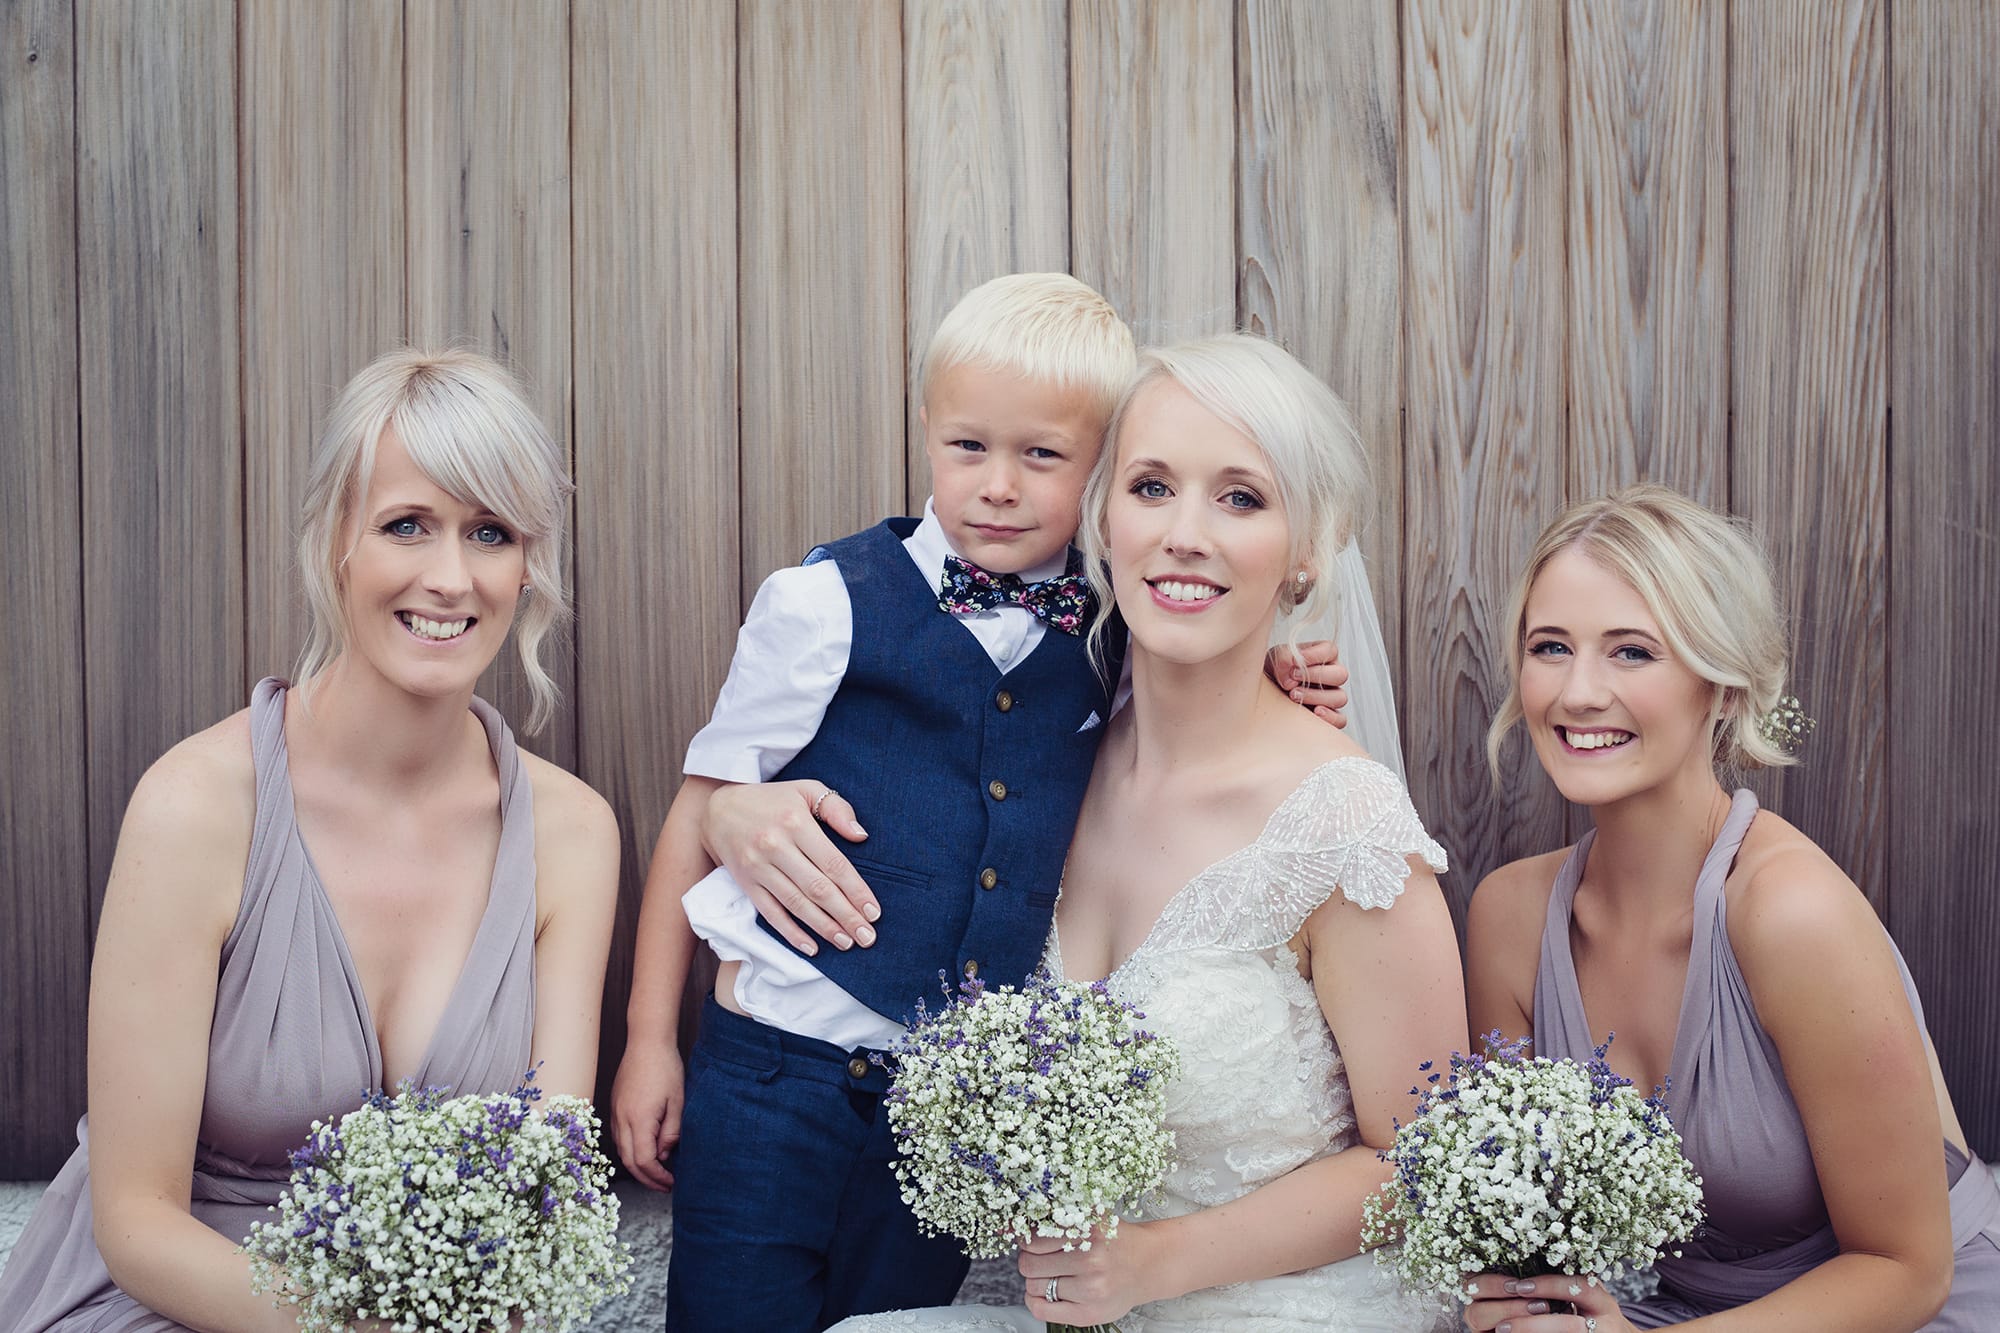 Sweet and Simple UK Wedding featuring Elison: Maggie Bride wearing Elison by Maggie Sottero.